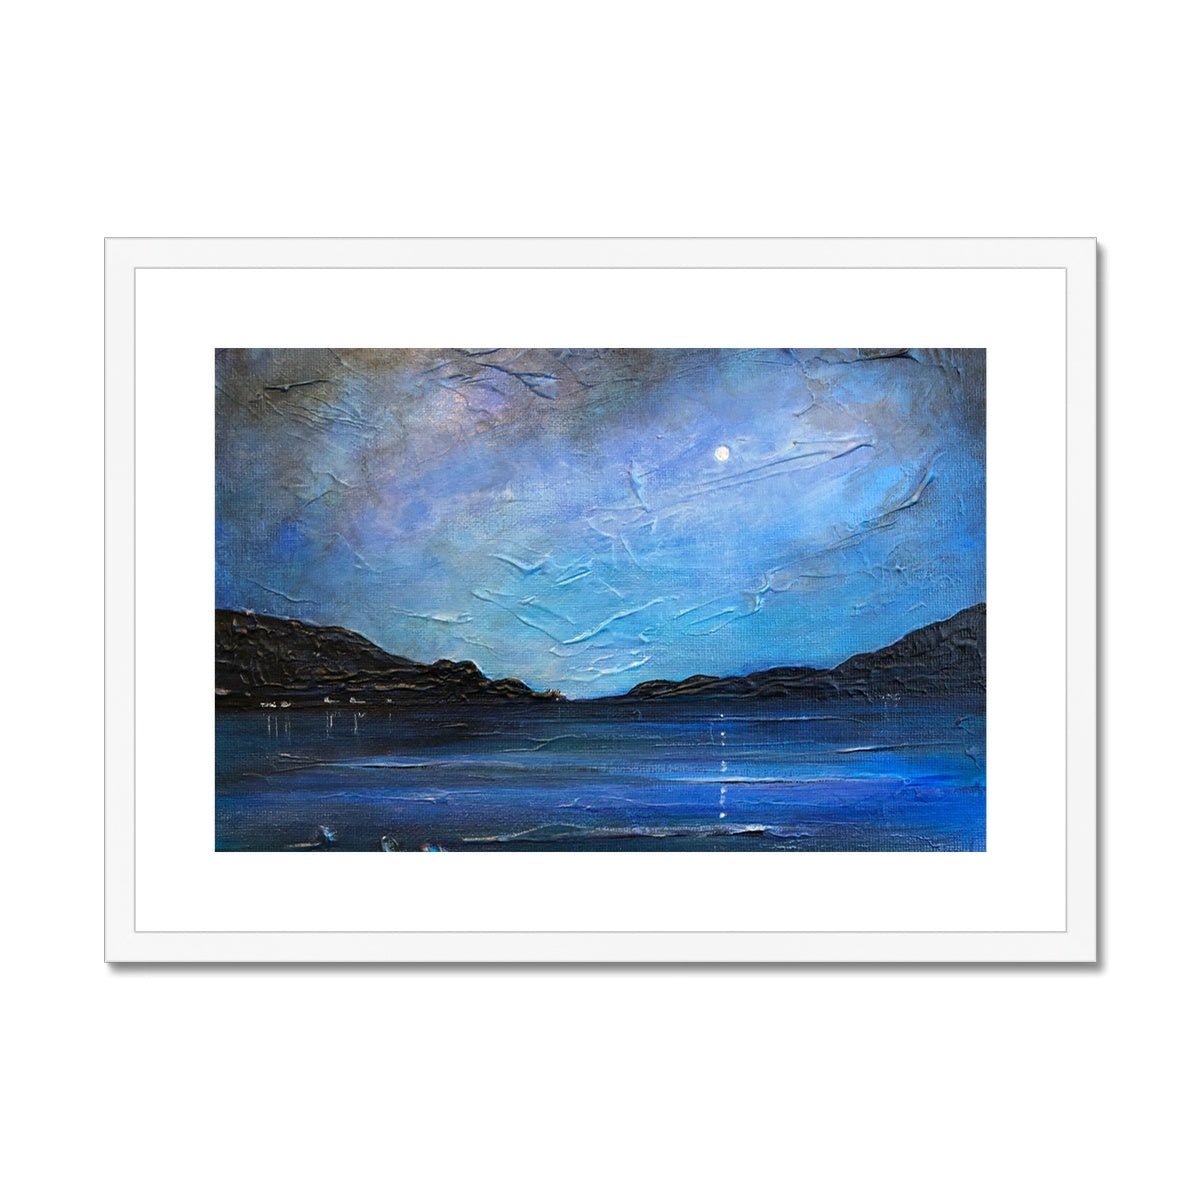 Loch Ness Moonlight Painting | Framed & Mounted Prints From Scotland-Framed & Mounted Prints-Scottish Lochs & Mountains Art Gallery-A2 Landscape-White Frame-Paintings, Prints, Homeware, Art Gifts From Scotland By Scottish Artist Kevin Hunter